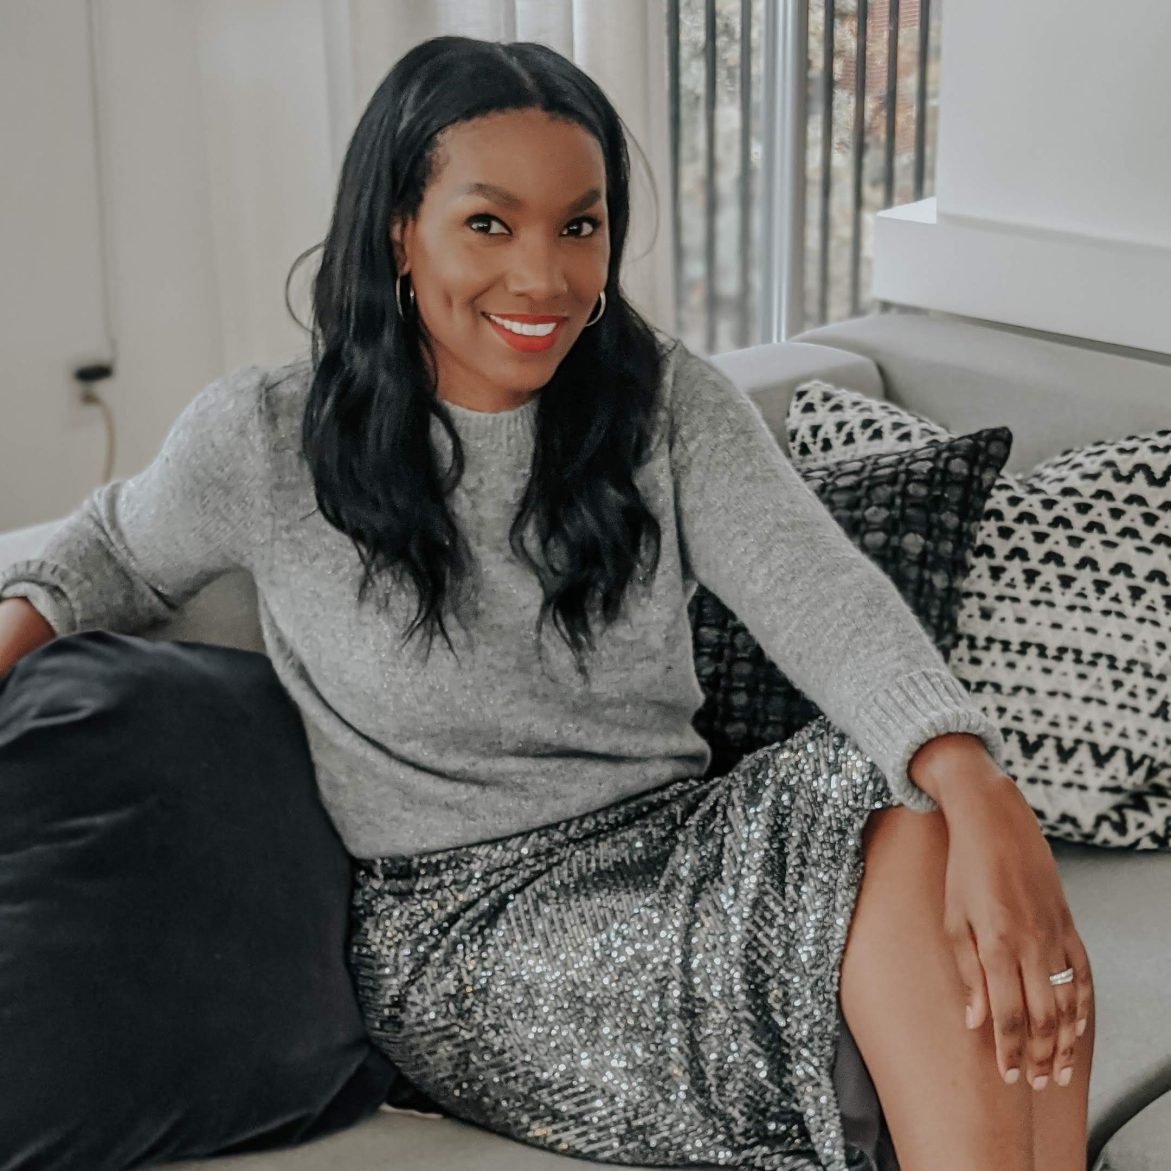 Black Podcasting - Beaute J&apos;adore a chat with Nikki Brooks